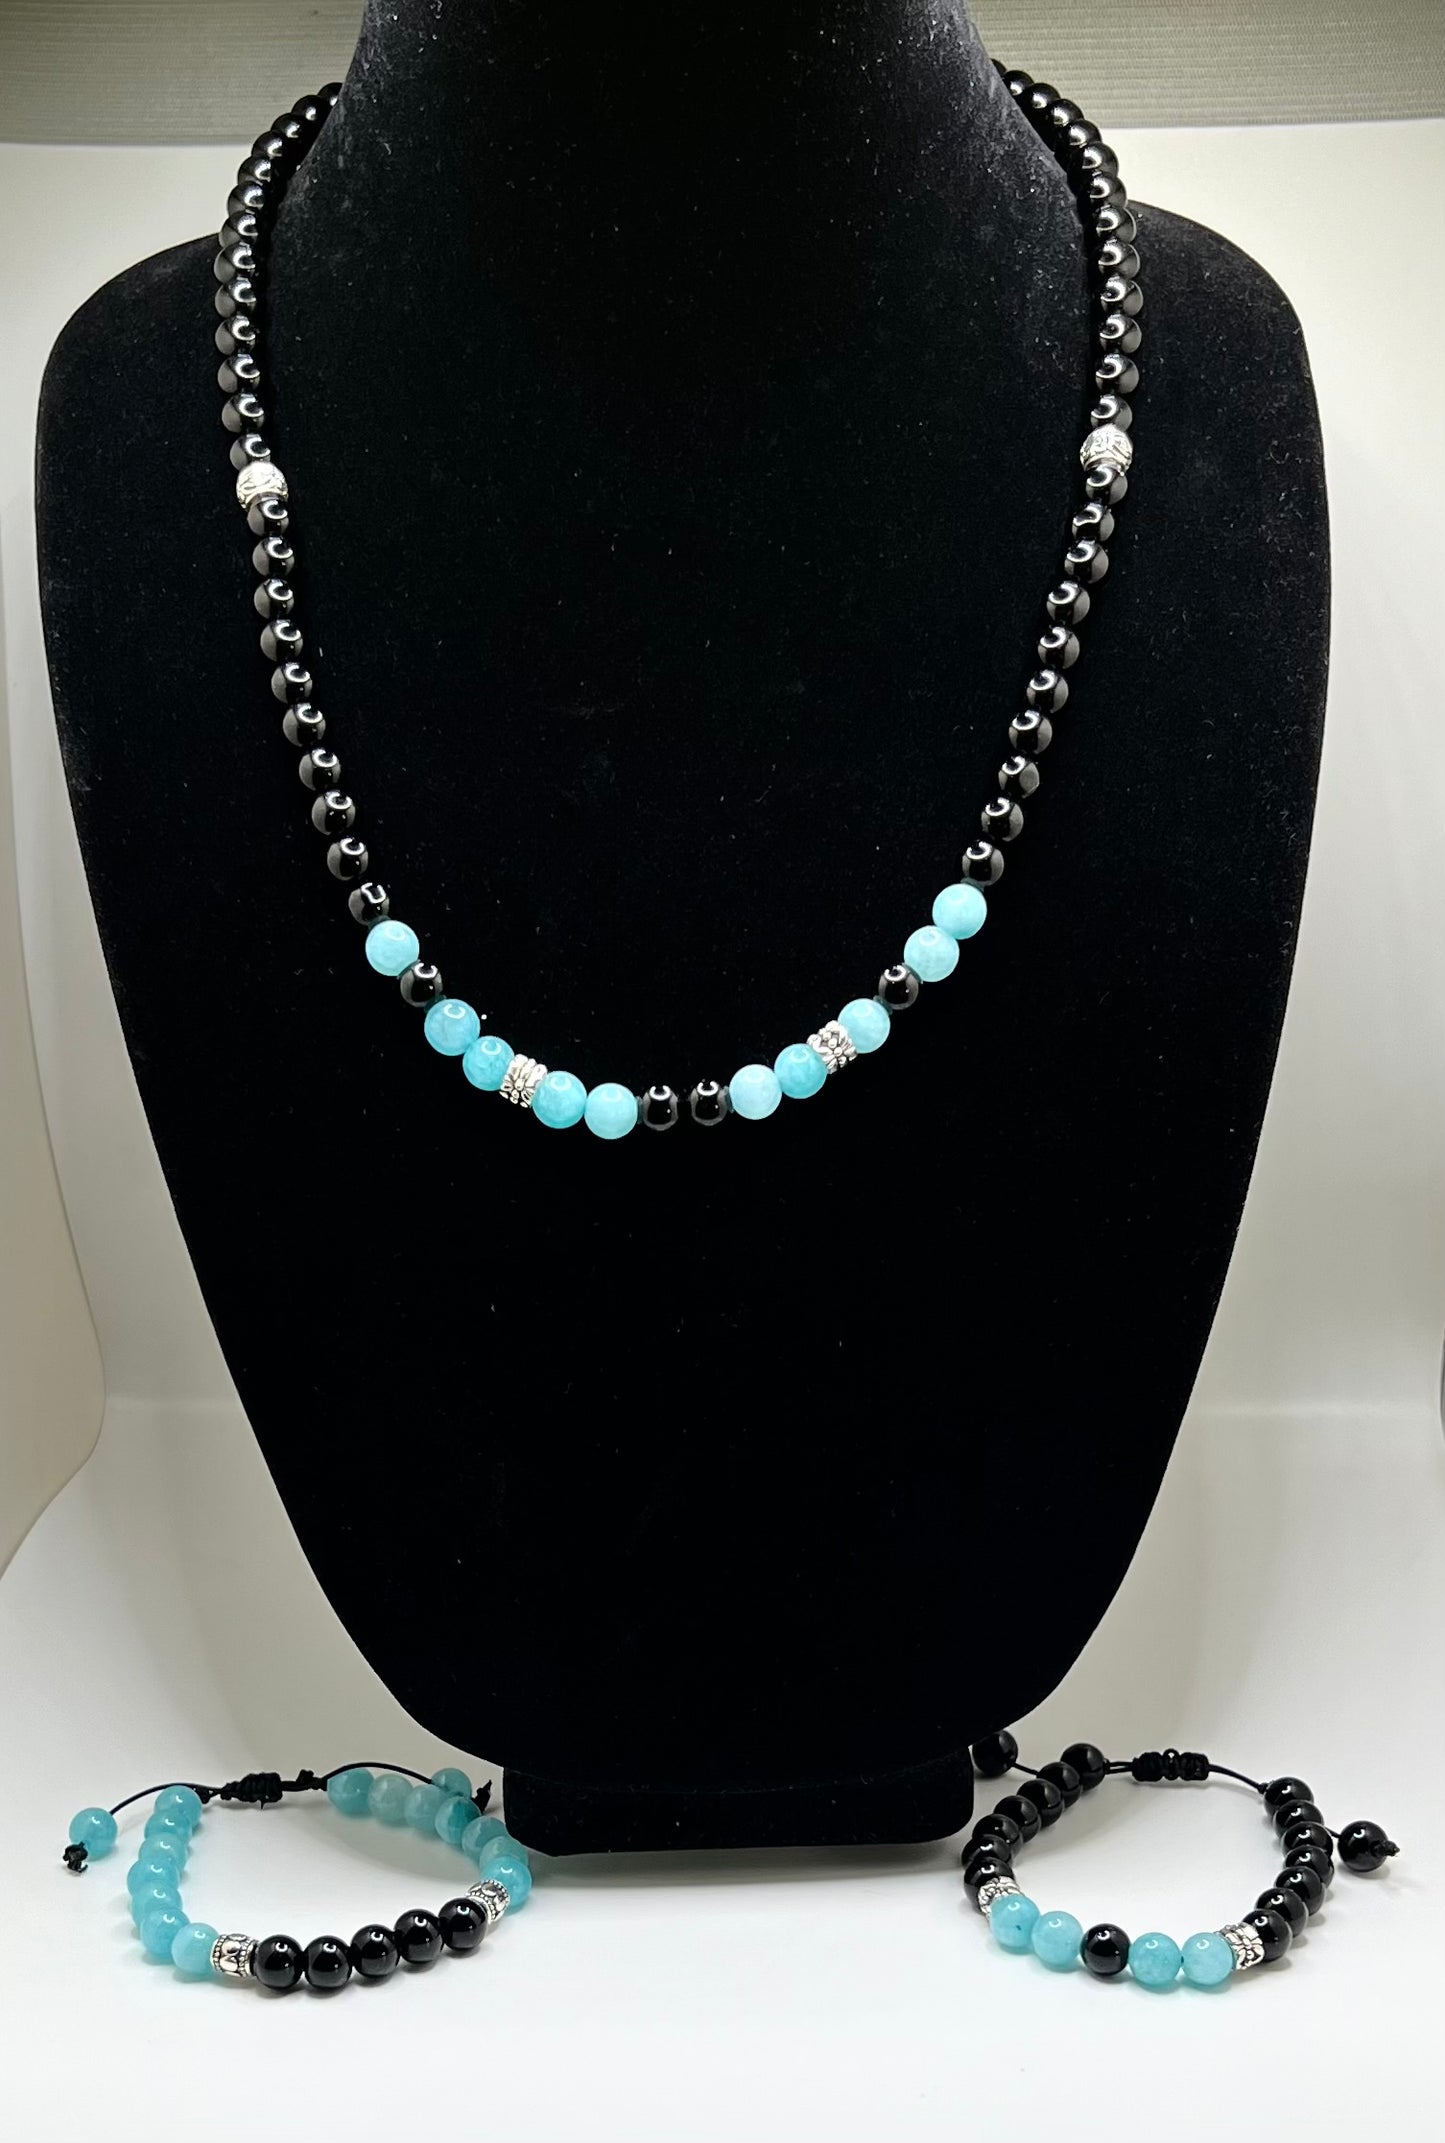 Obsidian with Tiffany blue beads Necklace and bracelets